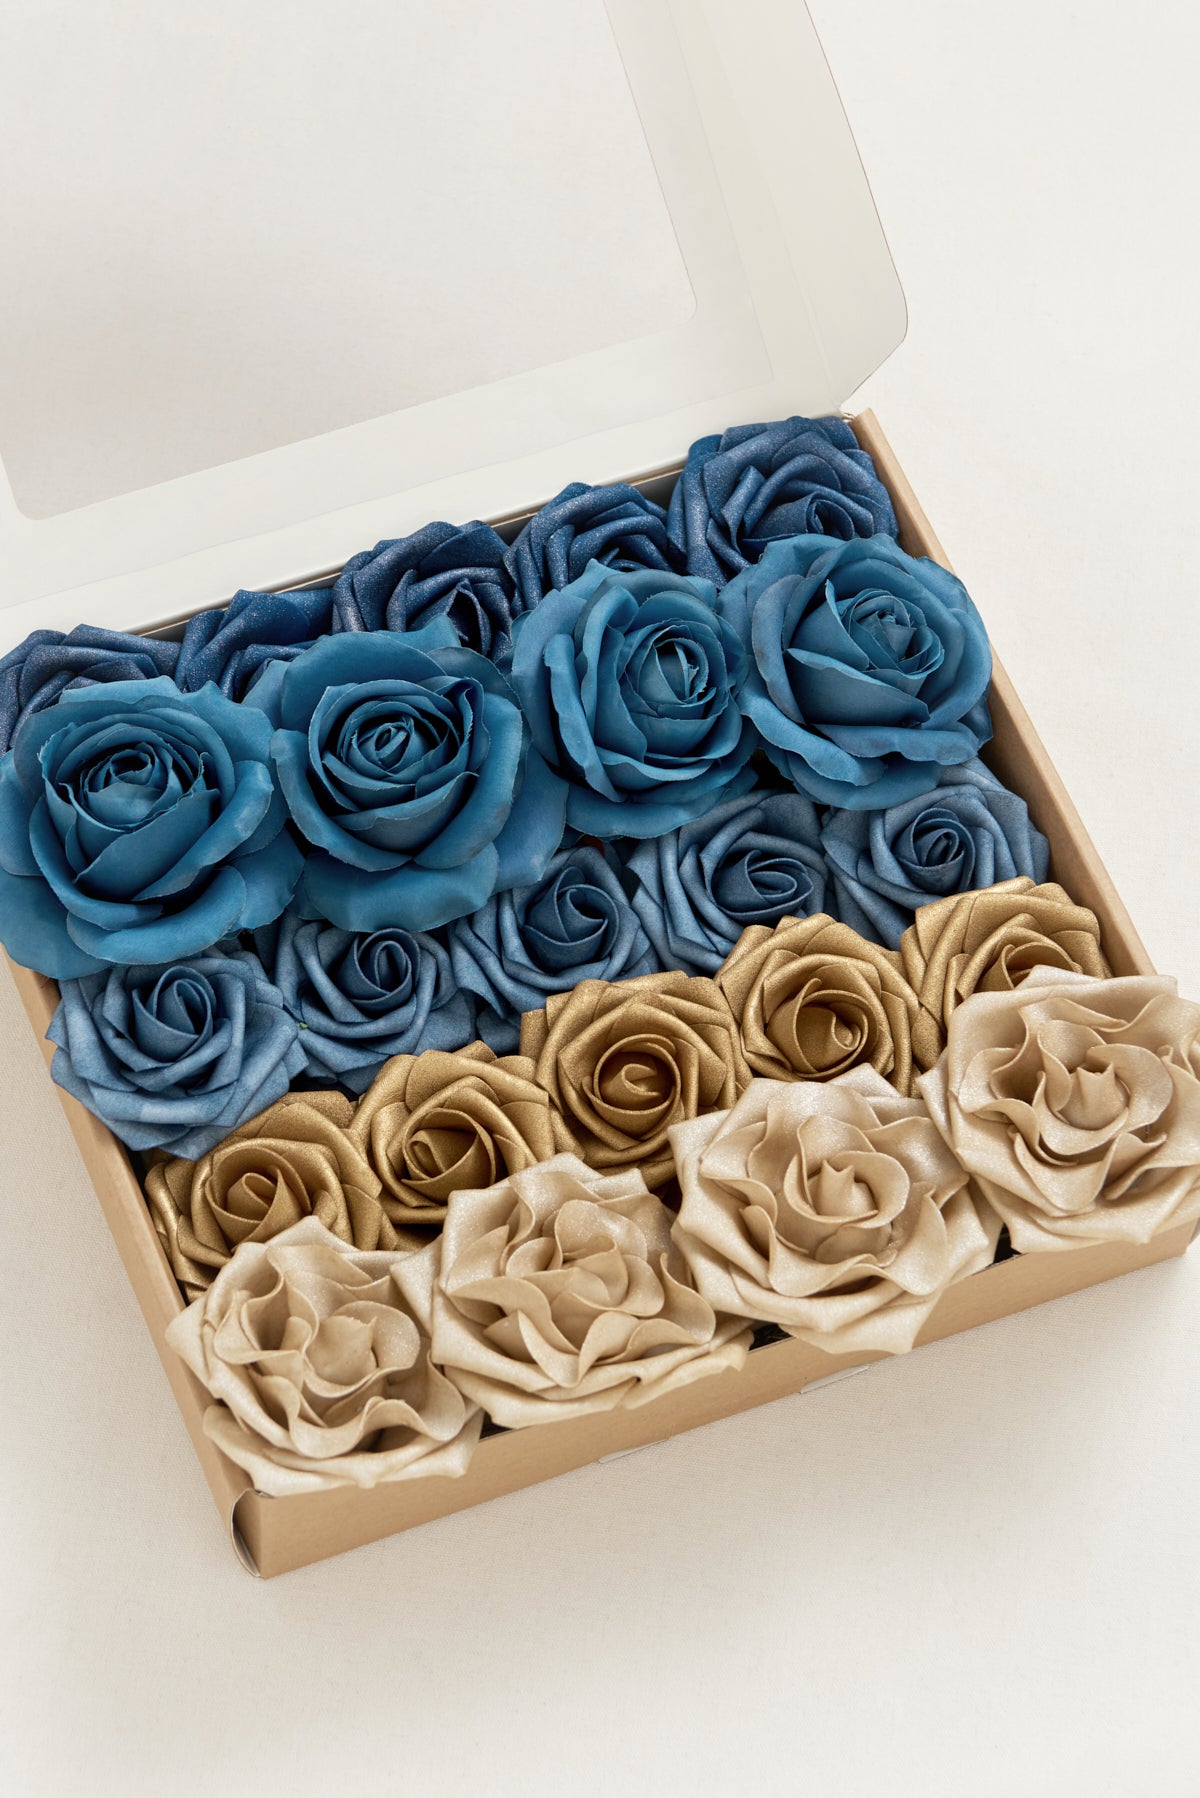 DIY Supporting Flower Boxes in Stately Navy & Gold